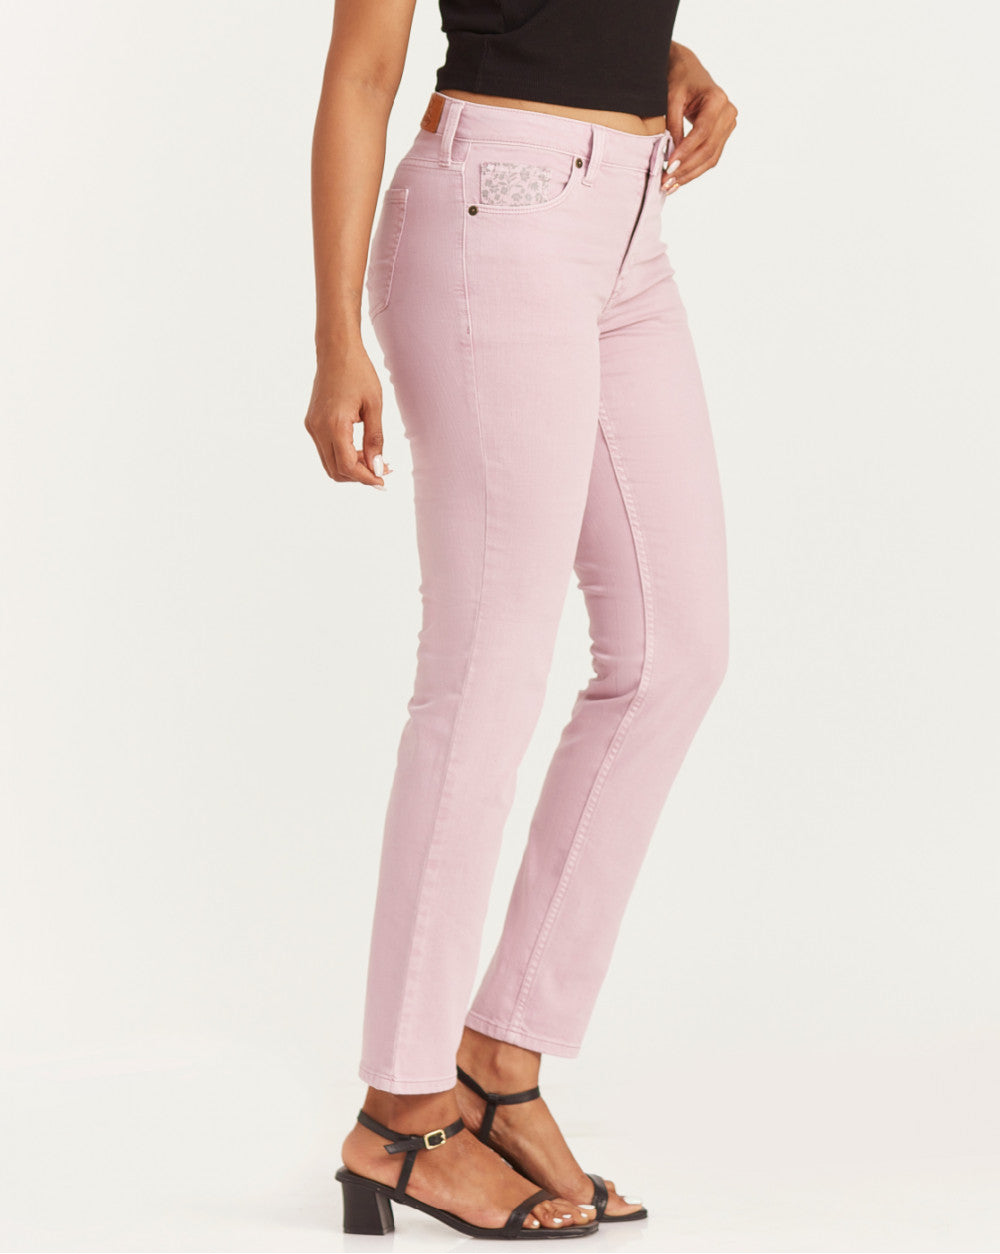 Slim Fit Mid Waist Colored Jeans - Lush Lilac